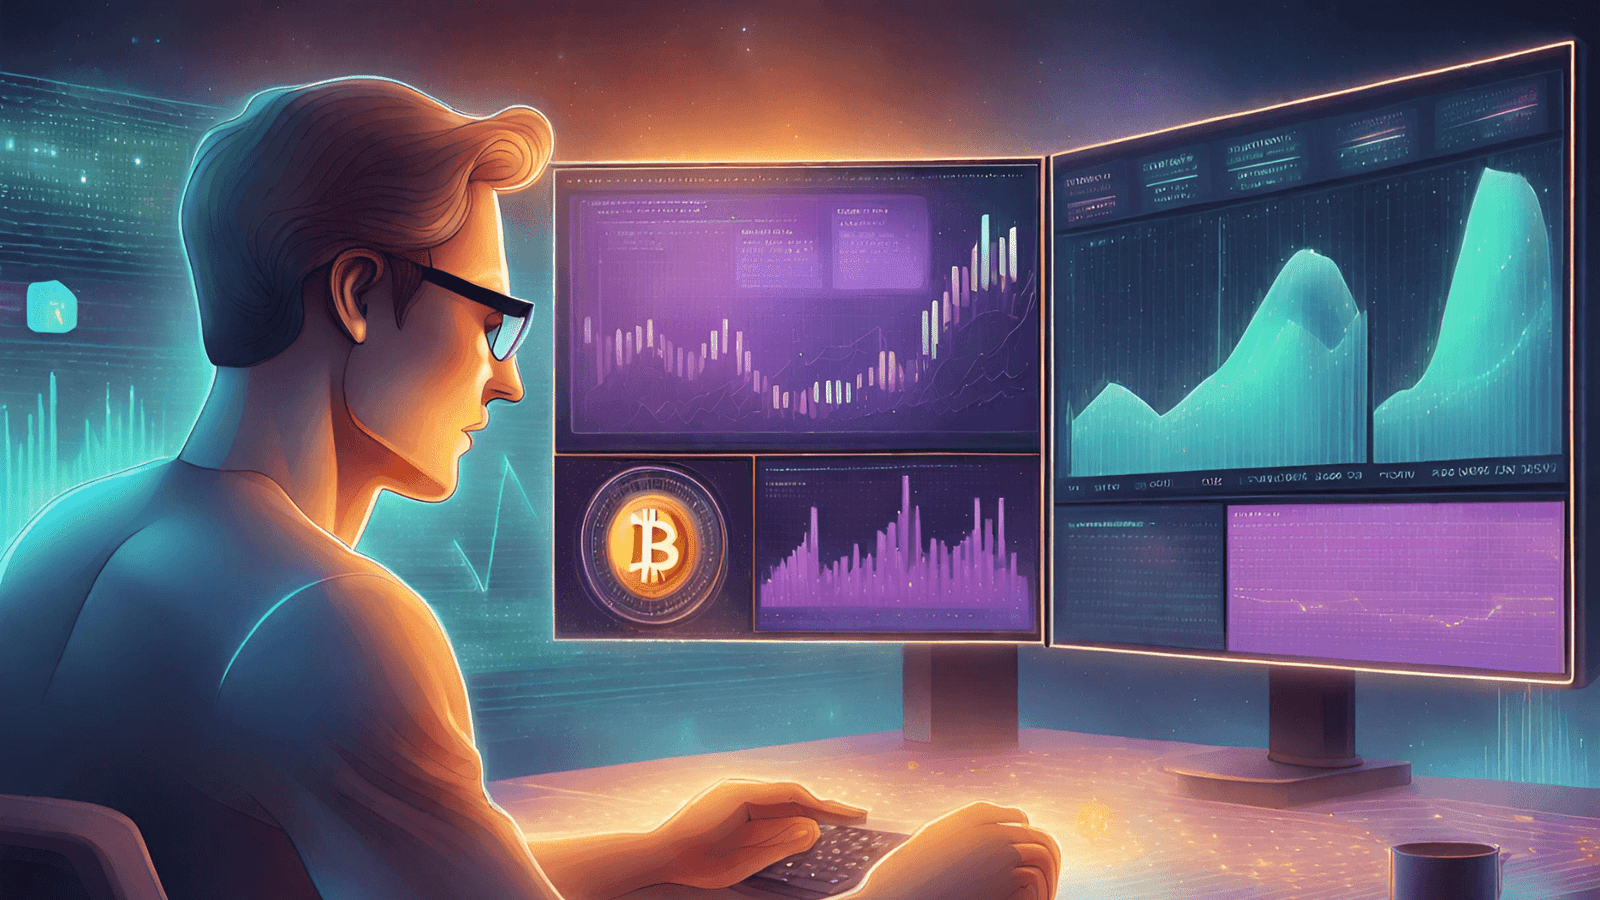 Anticipating Cryptocurrency Prices with Machine Learning